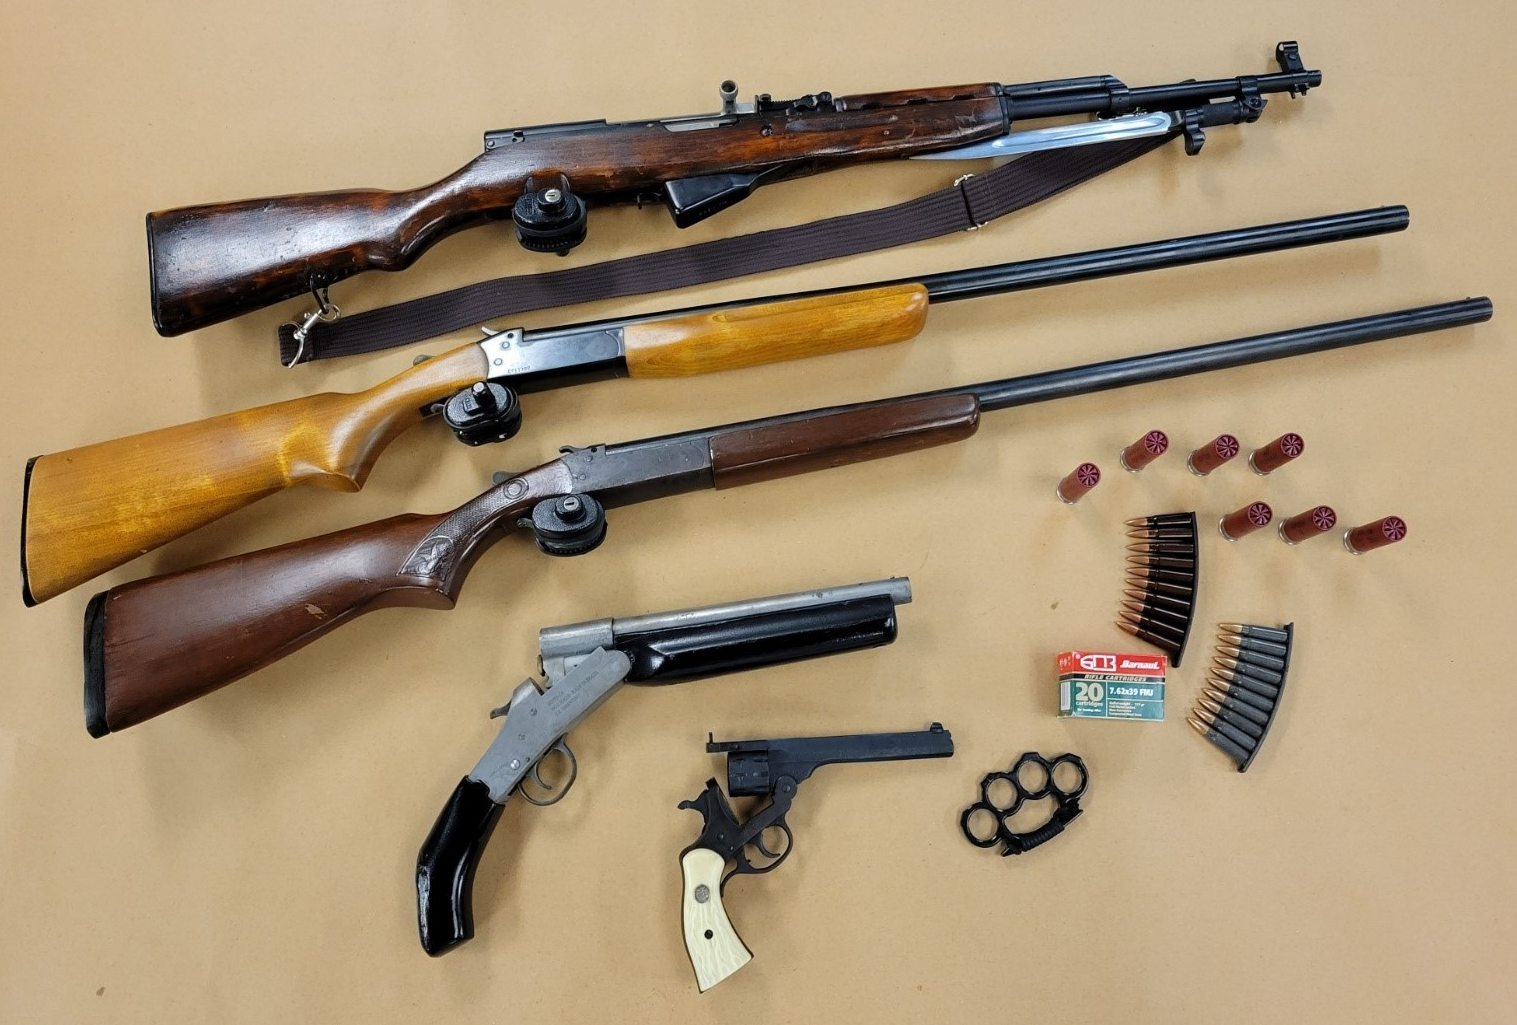 This is an image of seized items